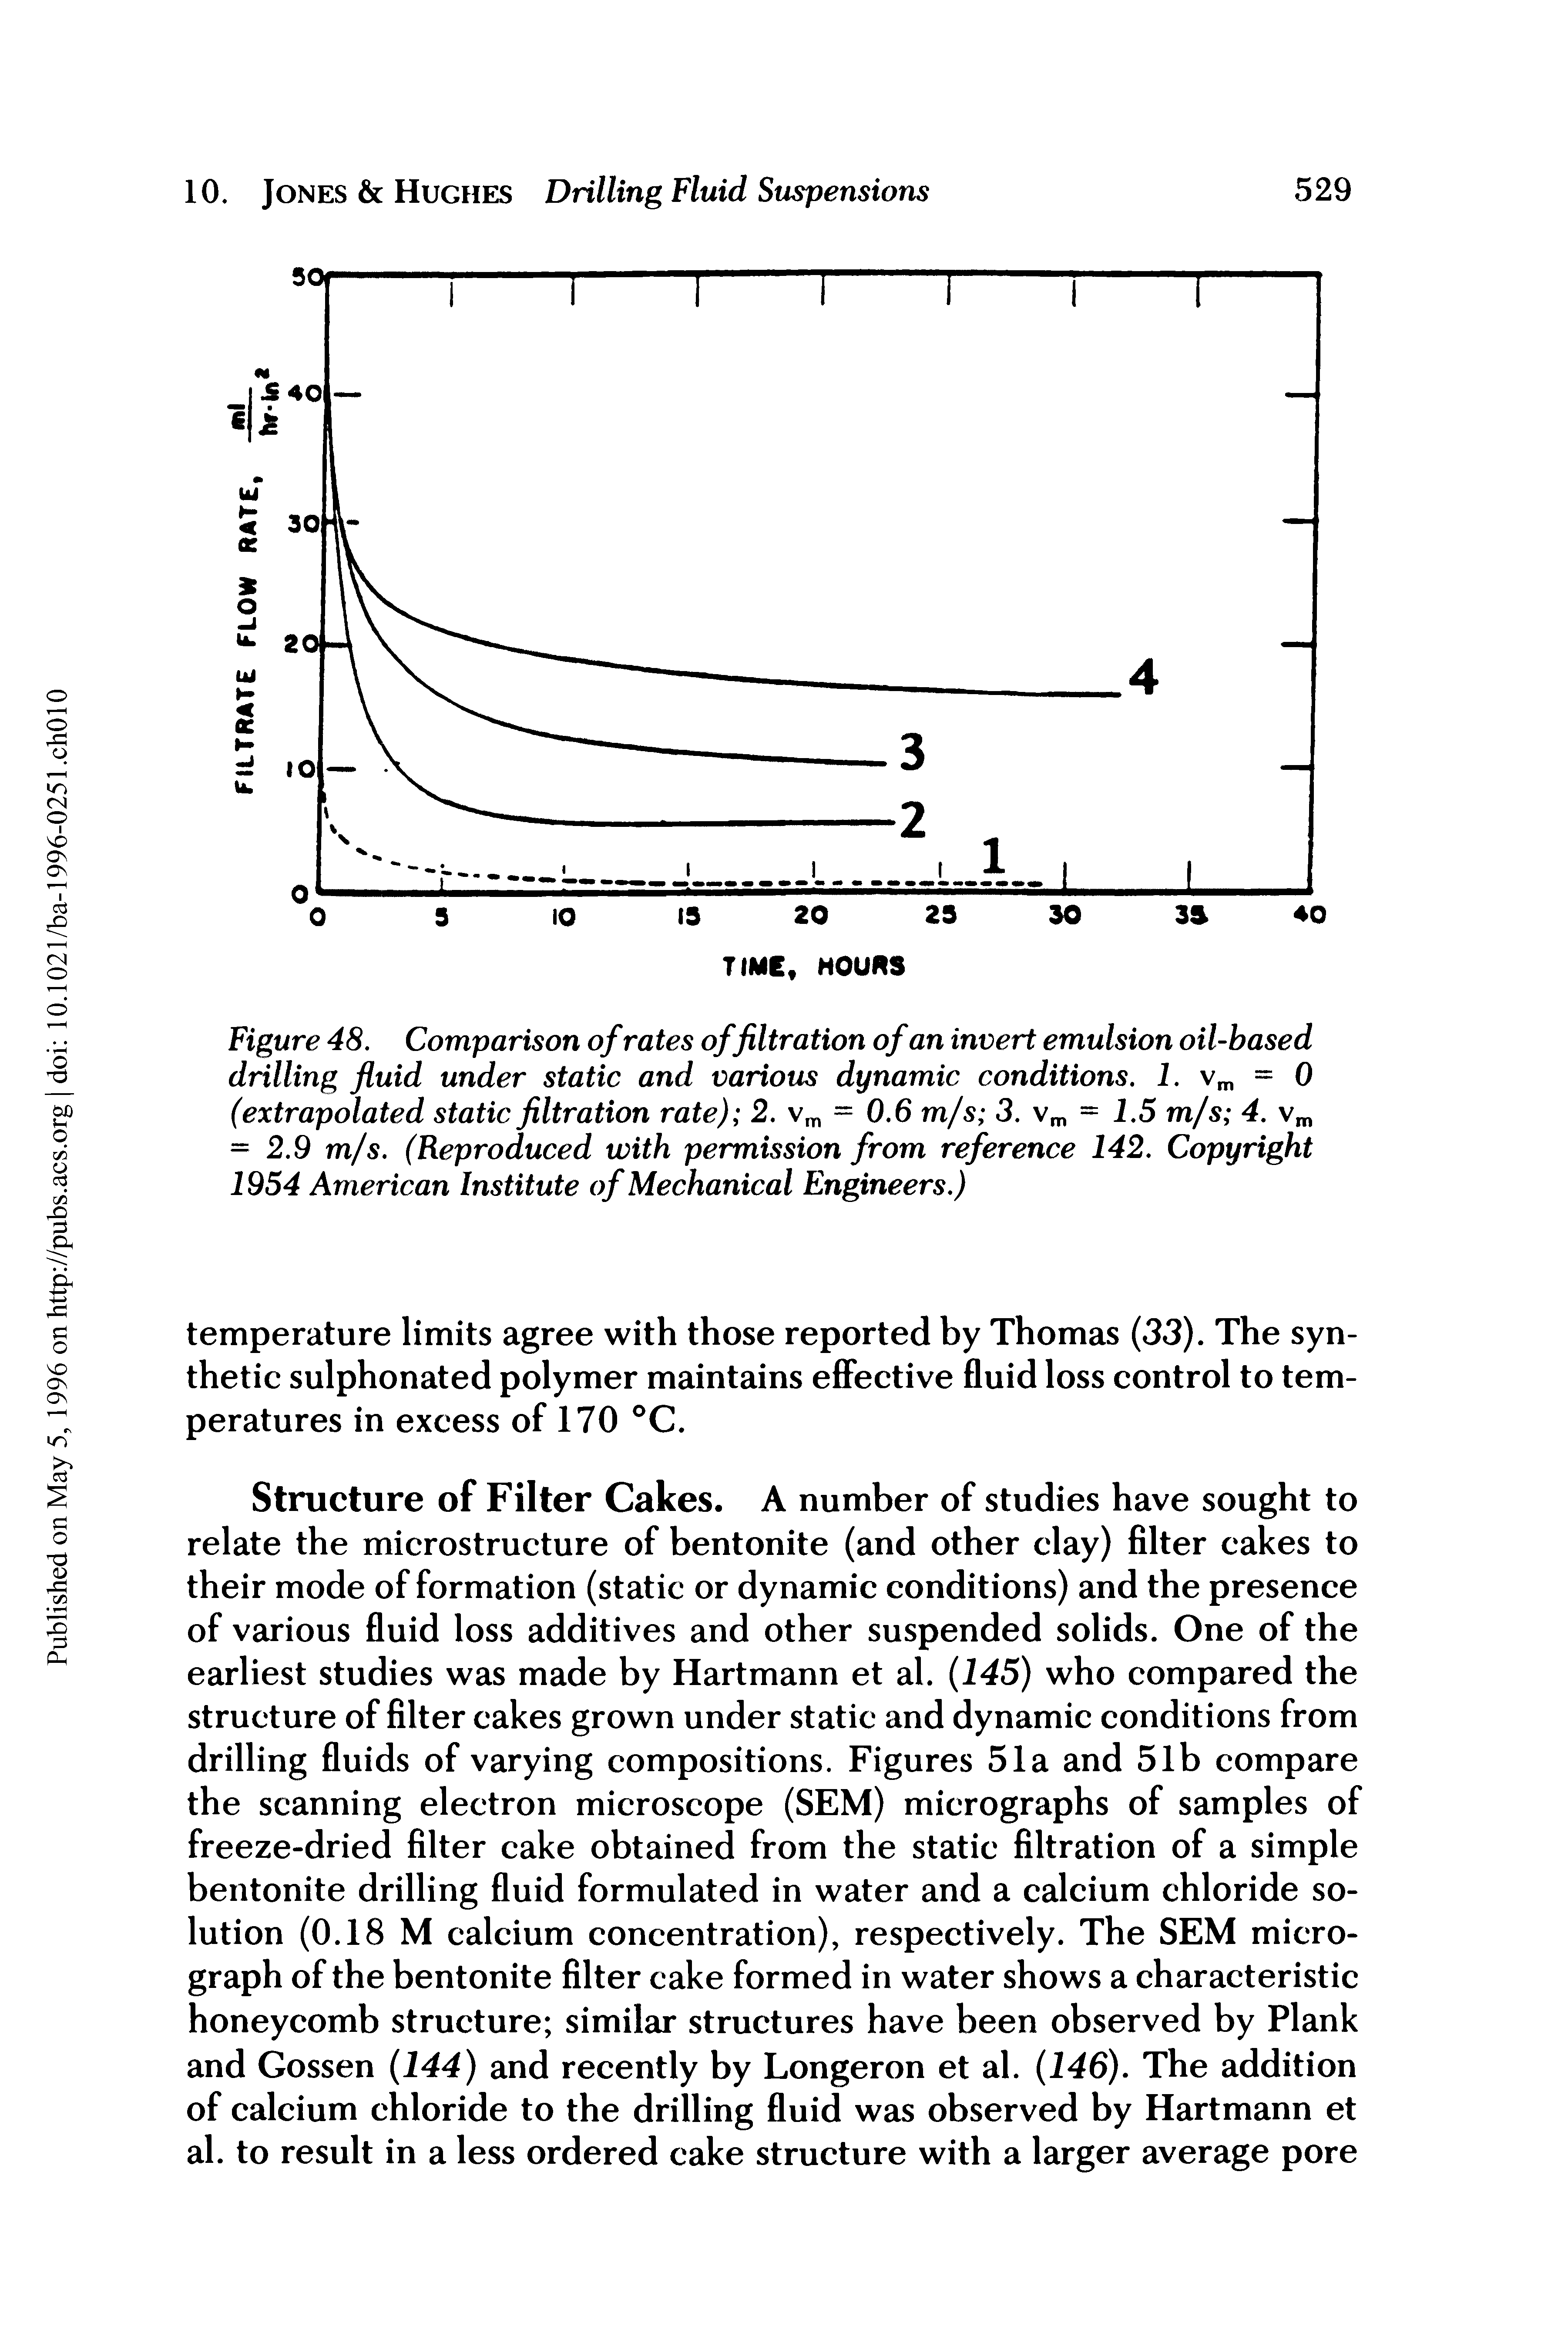 Figure 48. Comparison of rates offiltration of an invert emulsion oil-based drilling fluid under static and various dynamic conditions. 1. vm = 0 (extrapolated static filtration rate) 2. vm = 0.6 m/s 3. vm = 1.5 m/s 4. vm = 2.9 m/s. (Reproduced with permission from reference 142. Copyright 1954 American Institute of Mechanical Engineers.)...